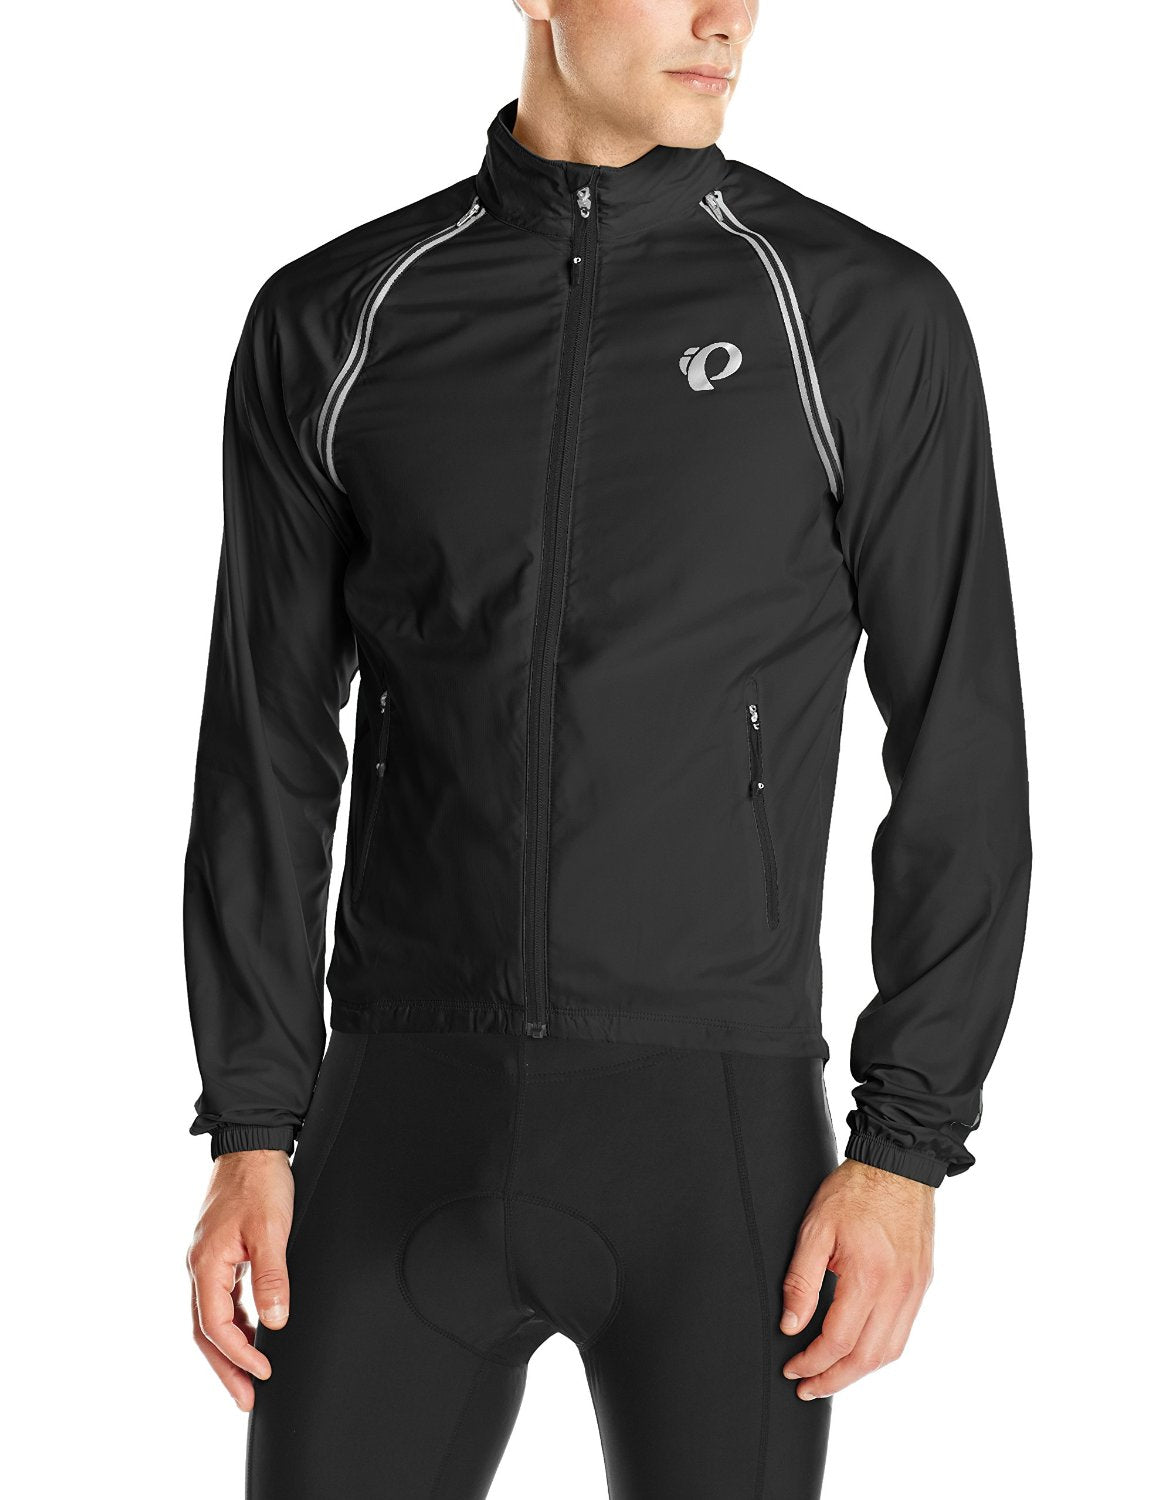 PEARL iZUMI  ELITE Barrier Convertible Cycling Jacket